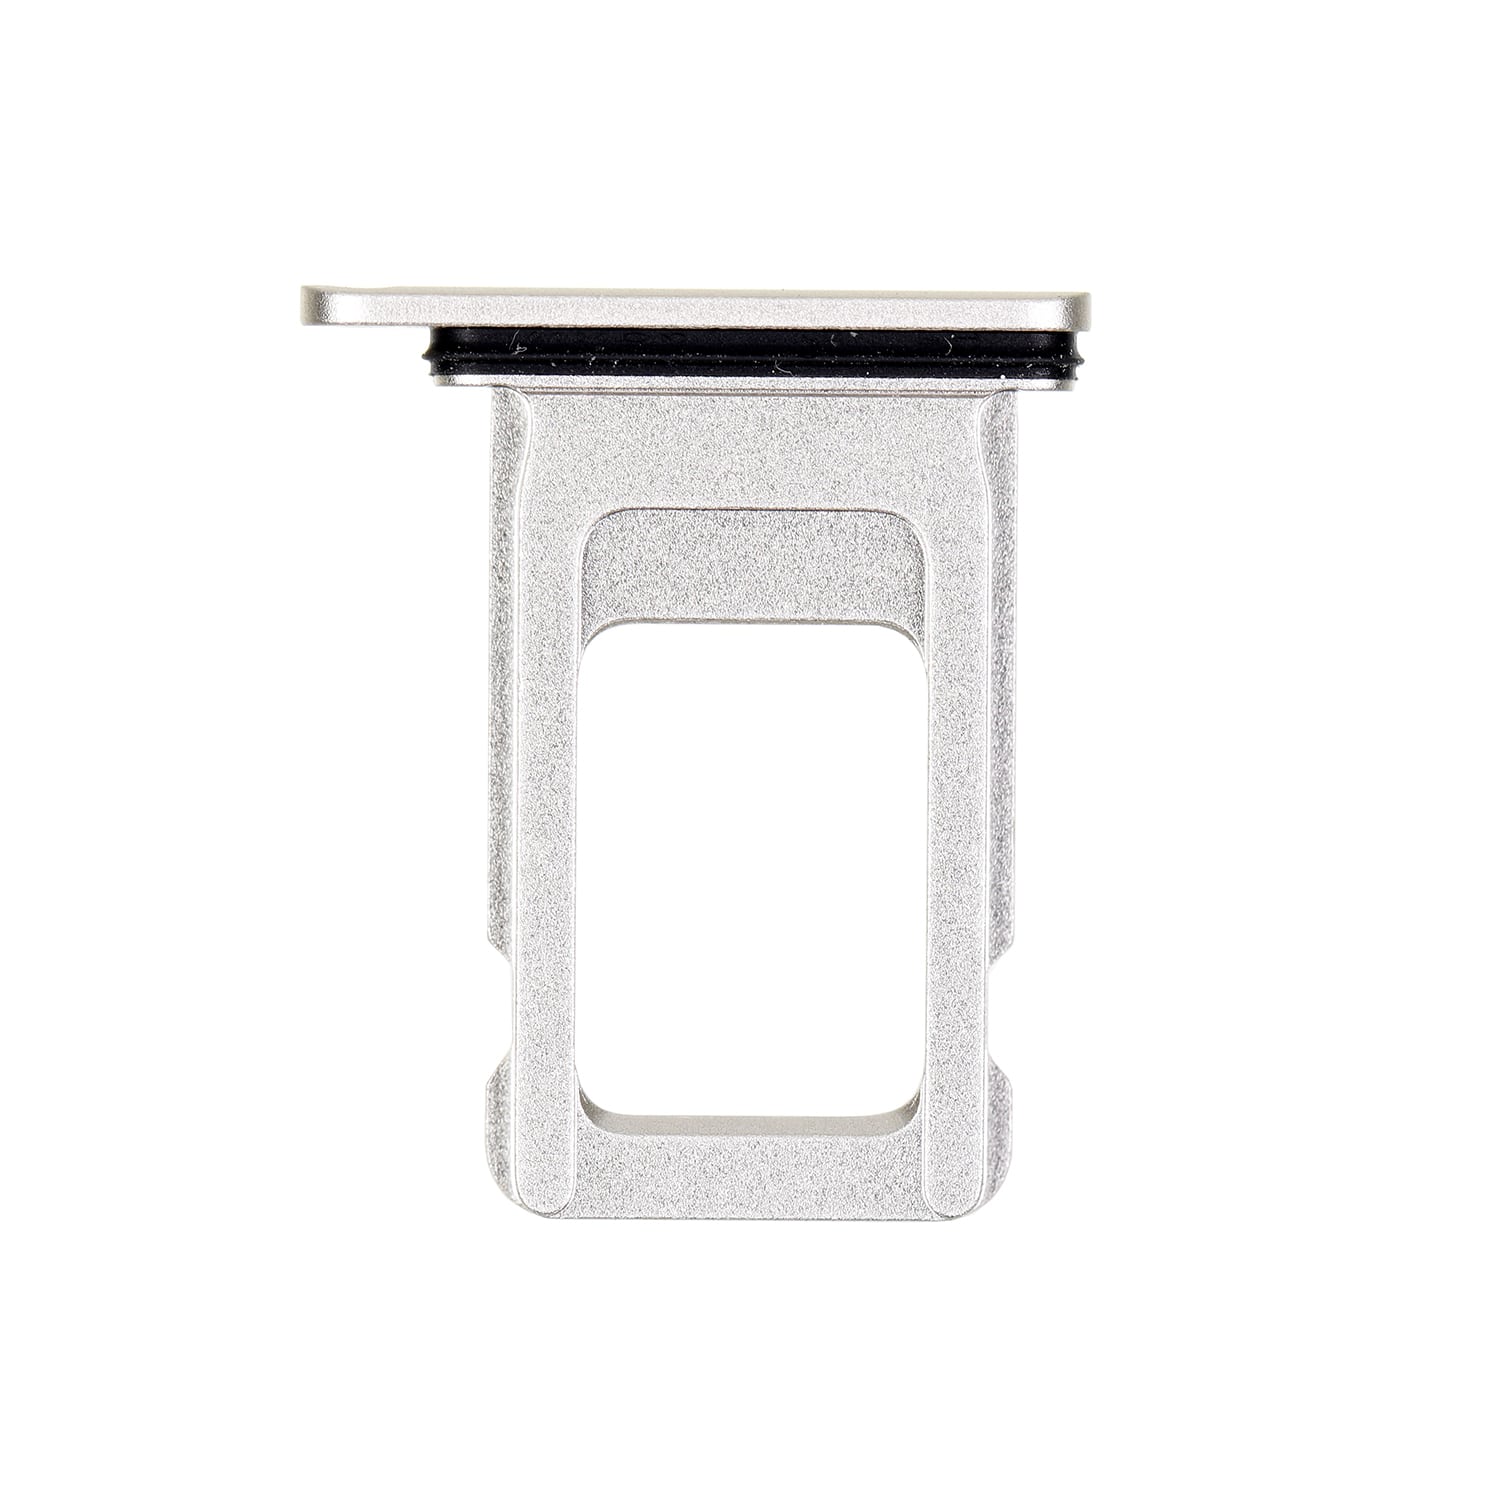 WHITE SINGLE SIM CARD TRAY FOR IPHONE 11